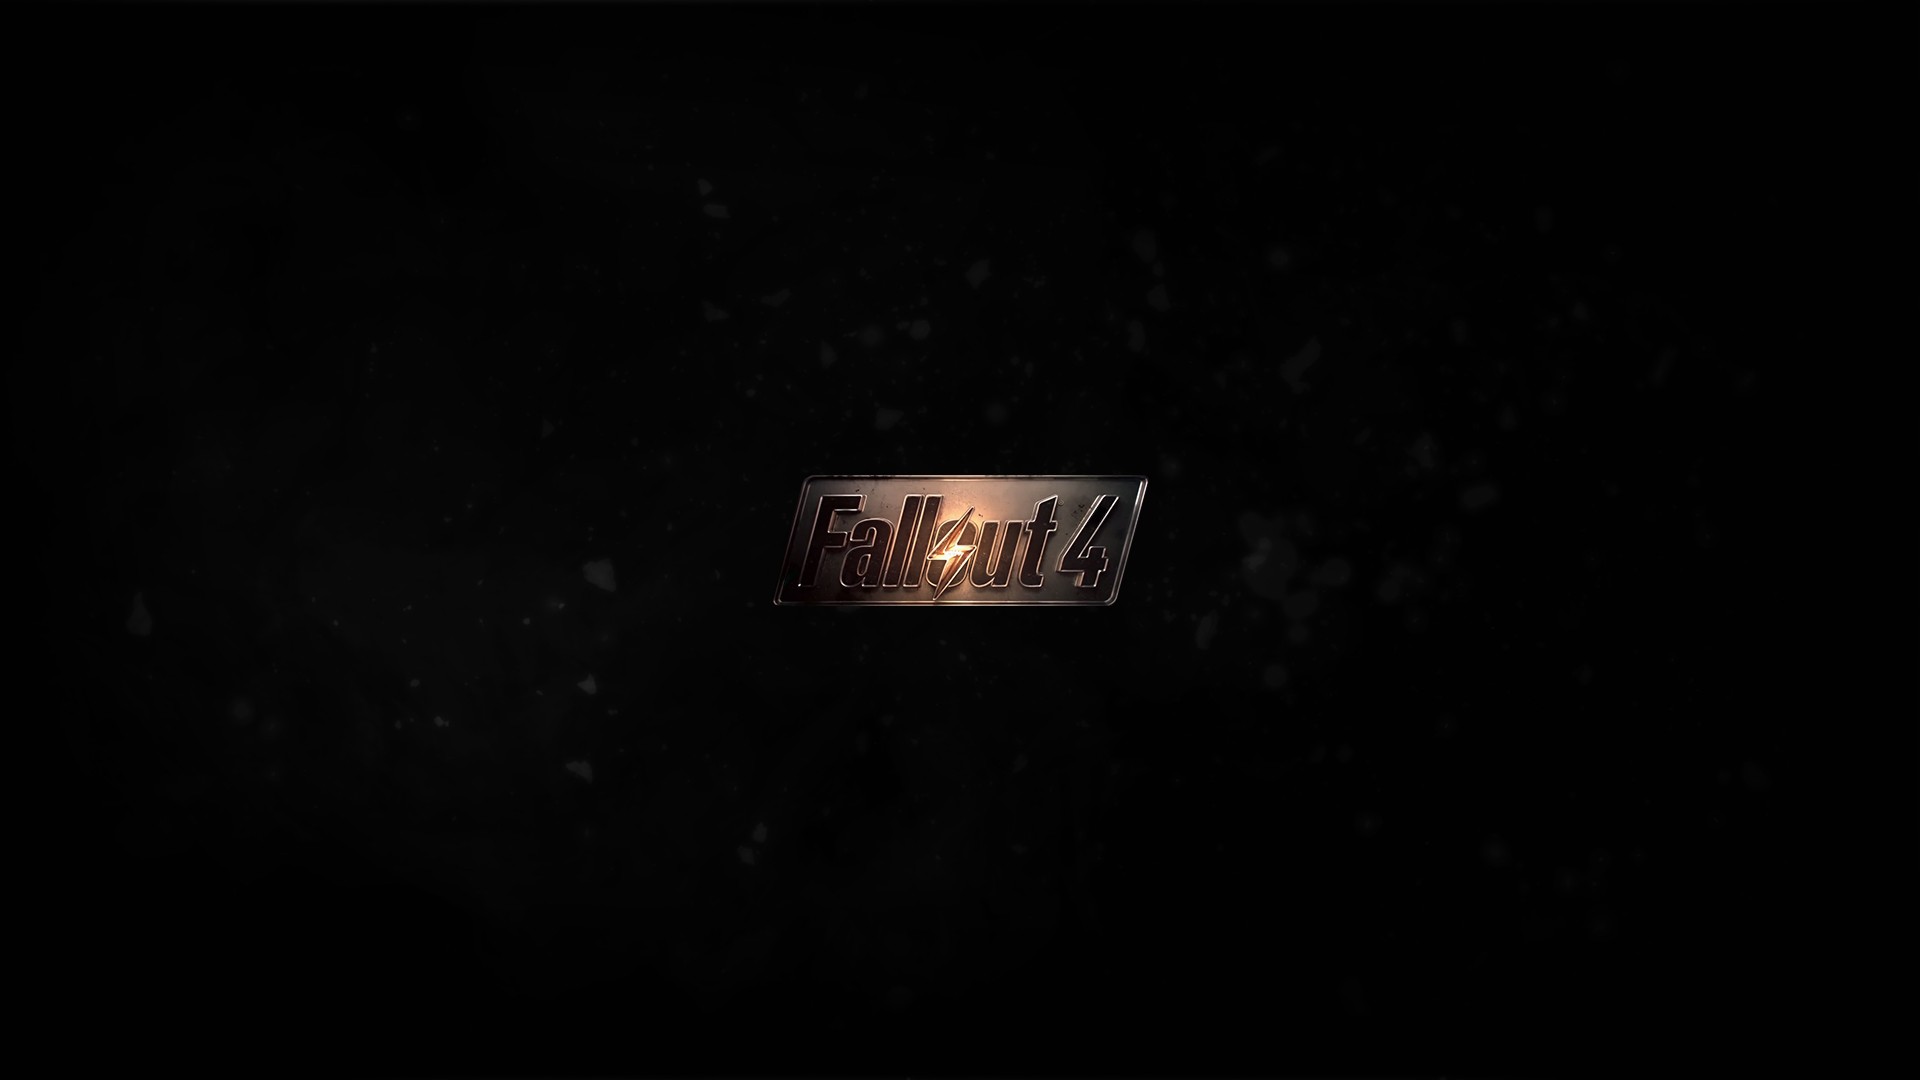 General 1920x1080 video games Fallout 4 Fallout logo minimalism simple background black background PC gaming